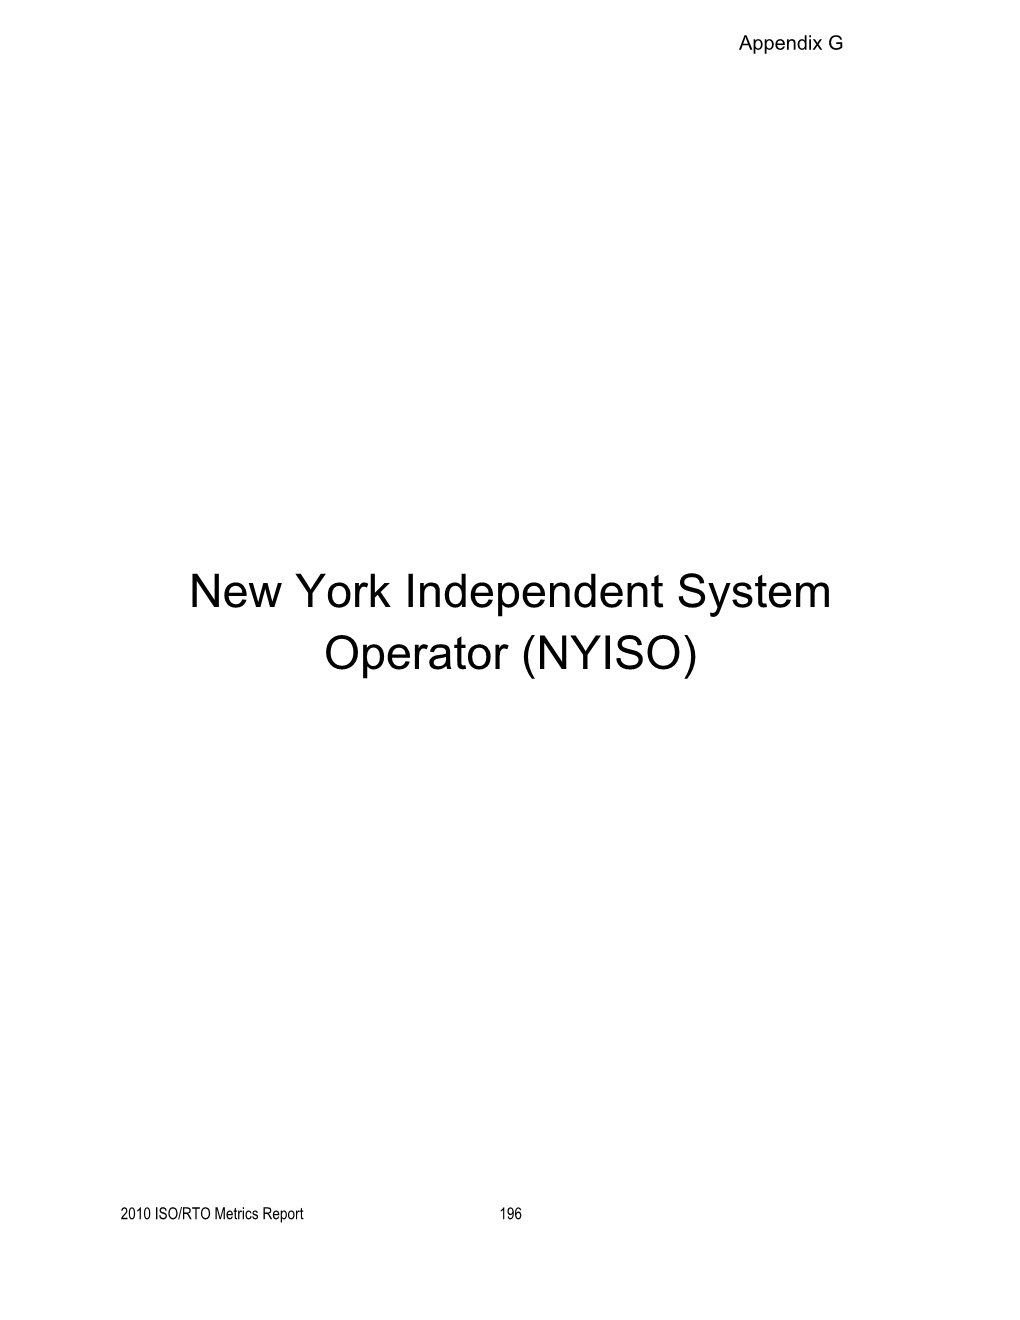 New York Independent System Operator (NYISO)